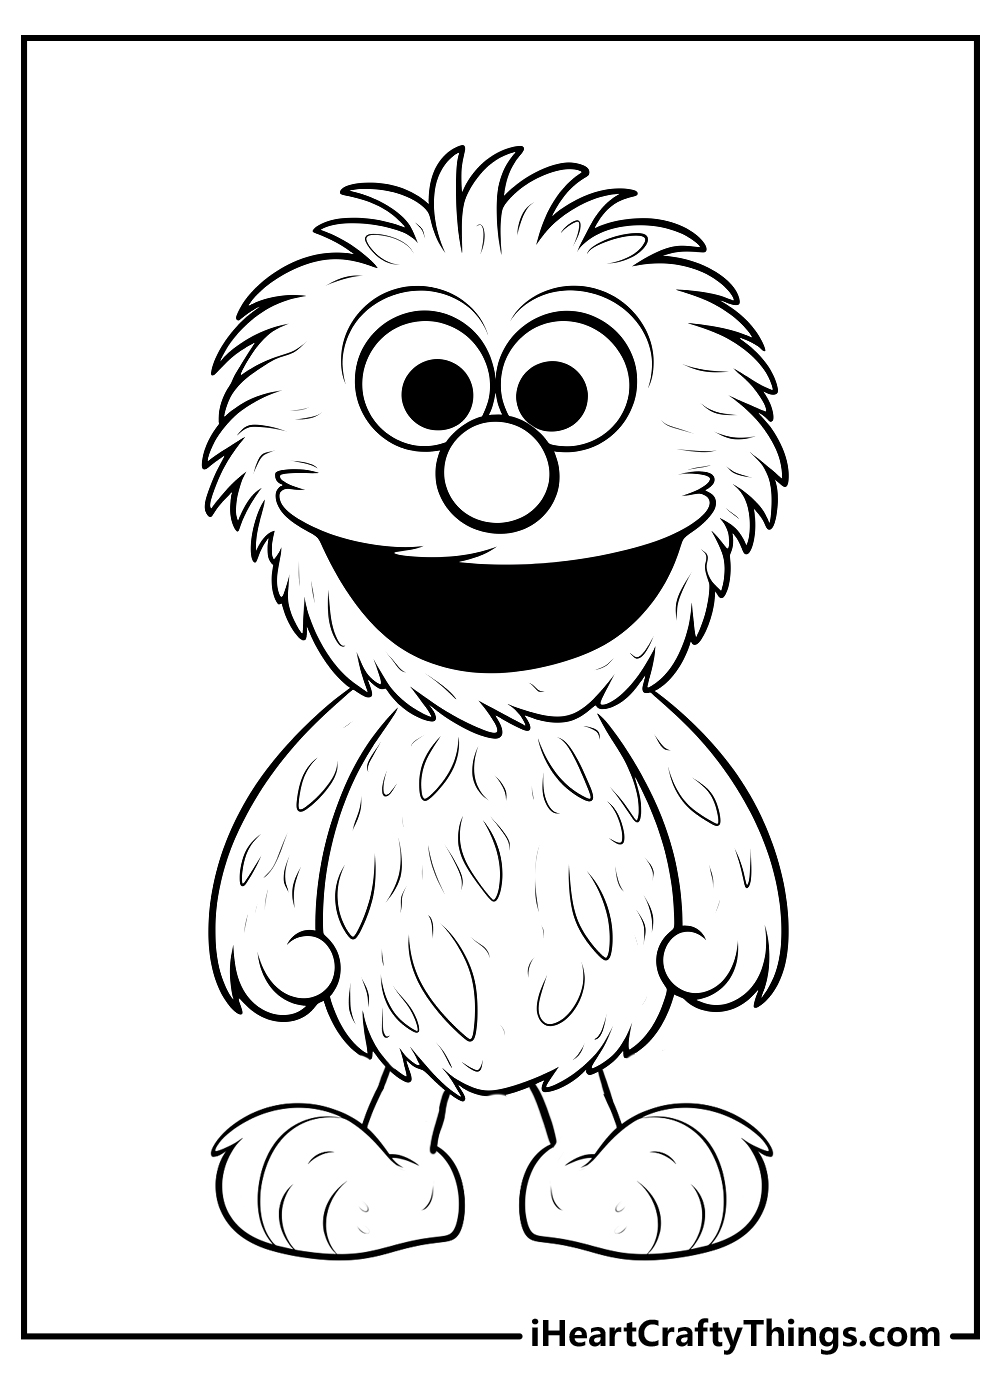 Elmo coloring pages for kids